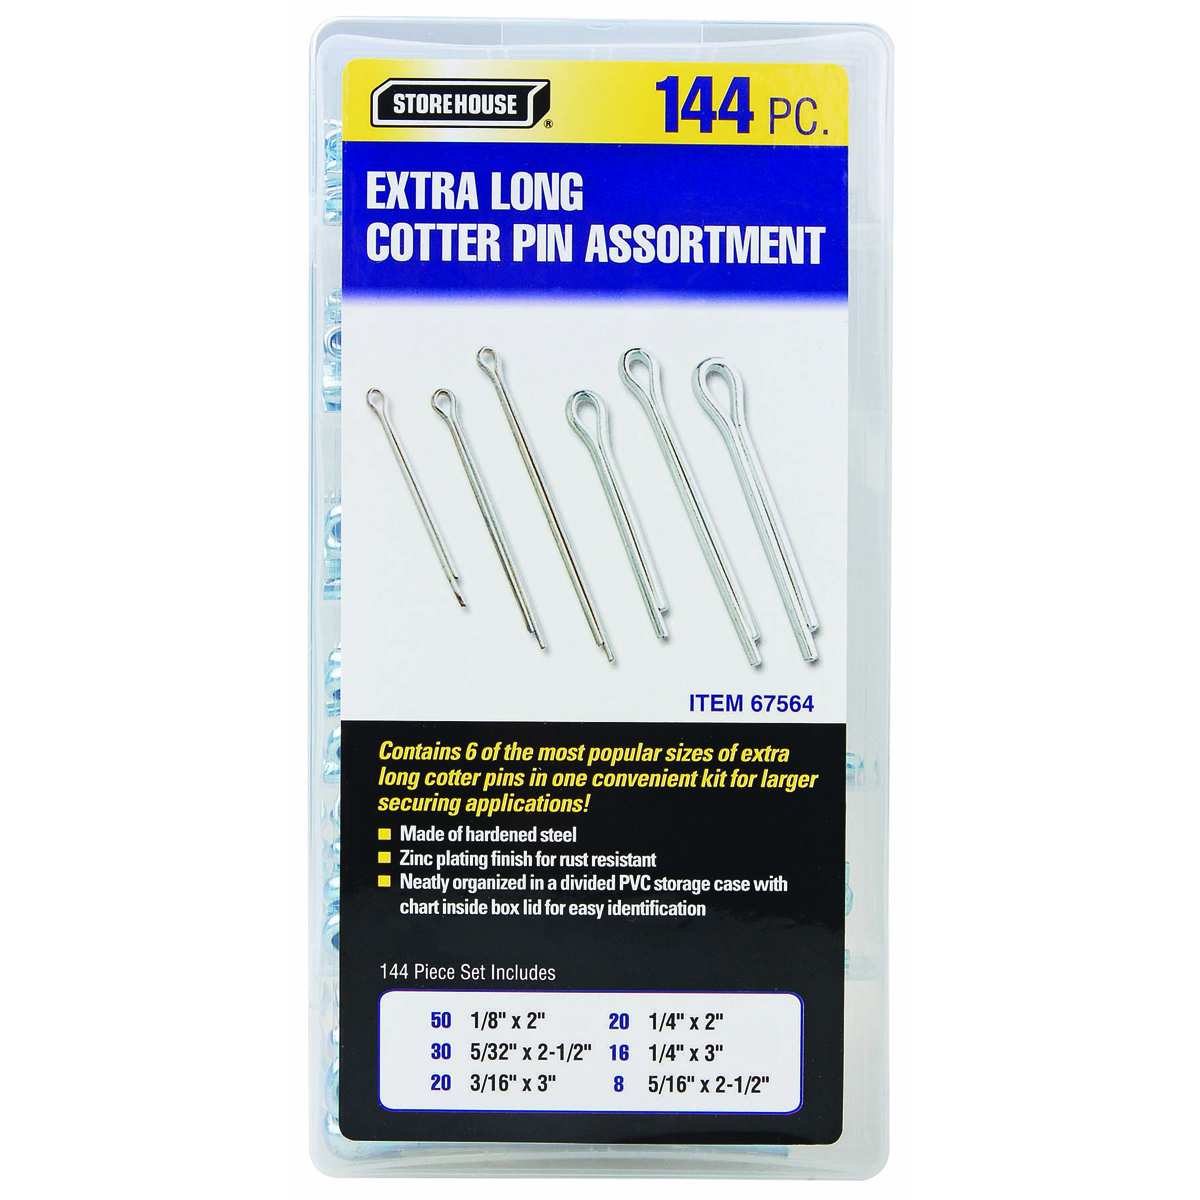 STOREHOUSE 144 Piece Extra Long Cotter Pin Assortment - Item 67564